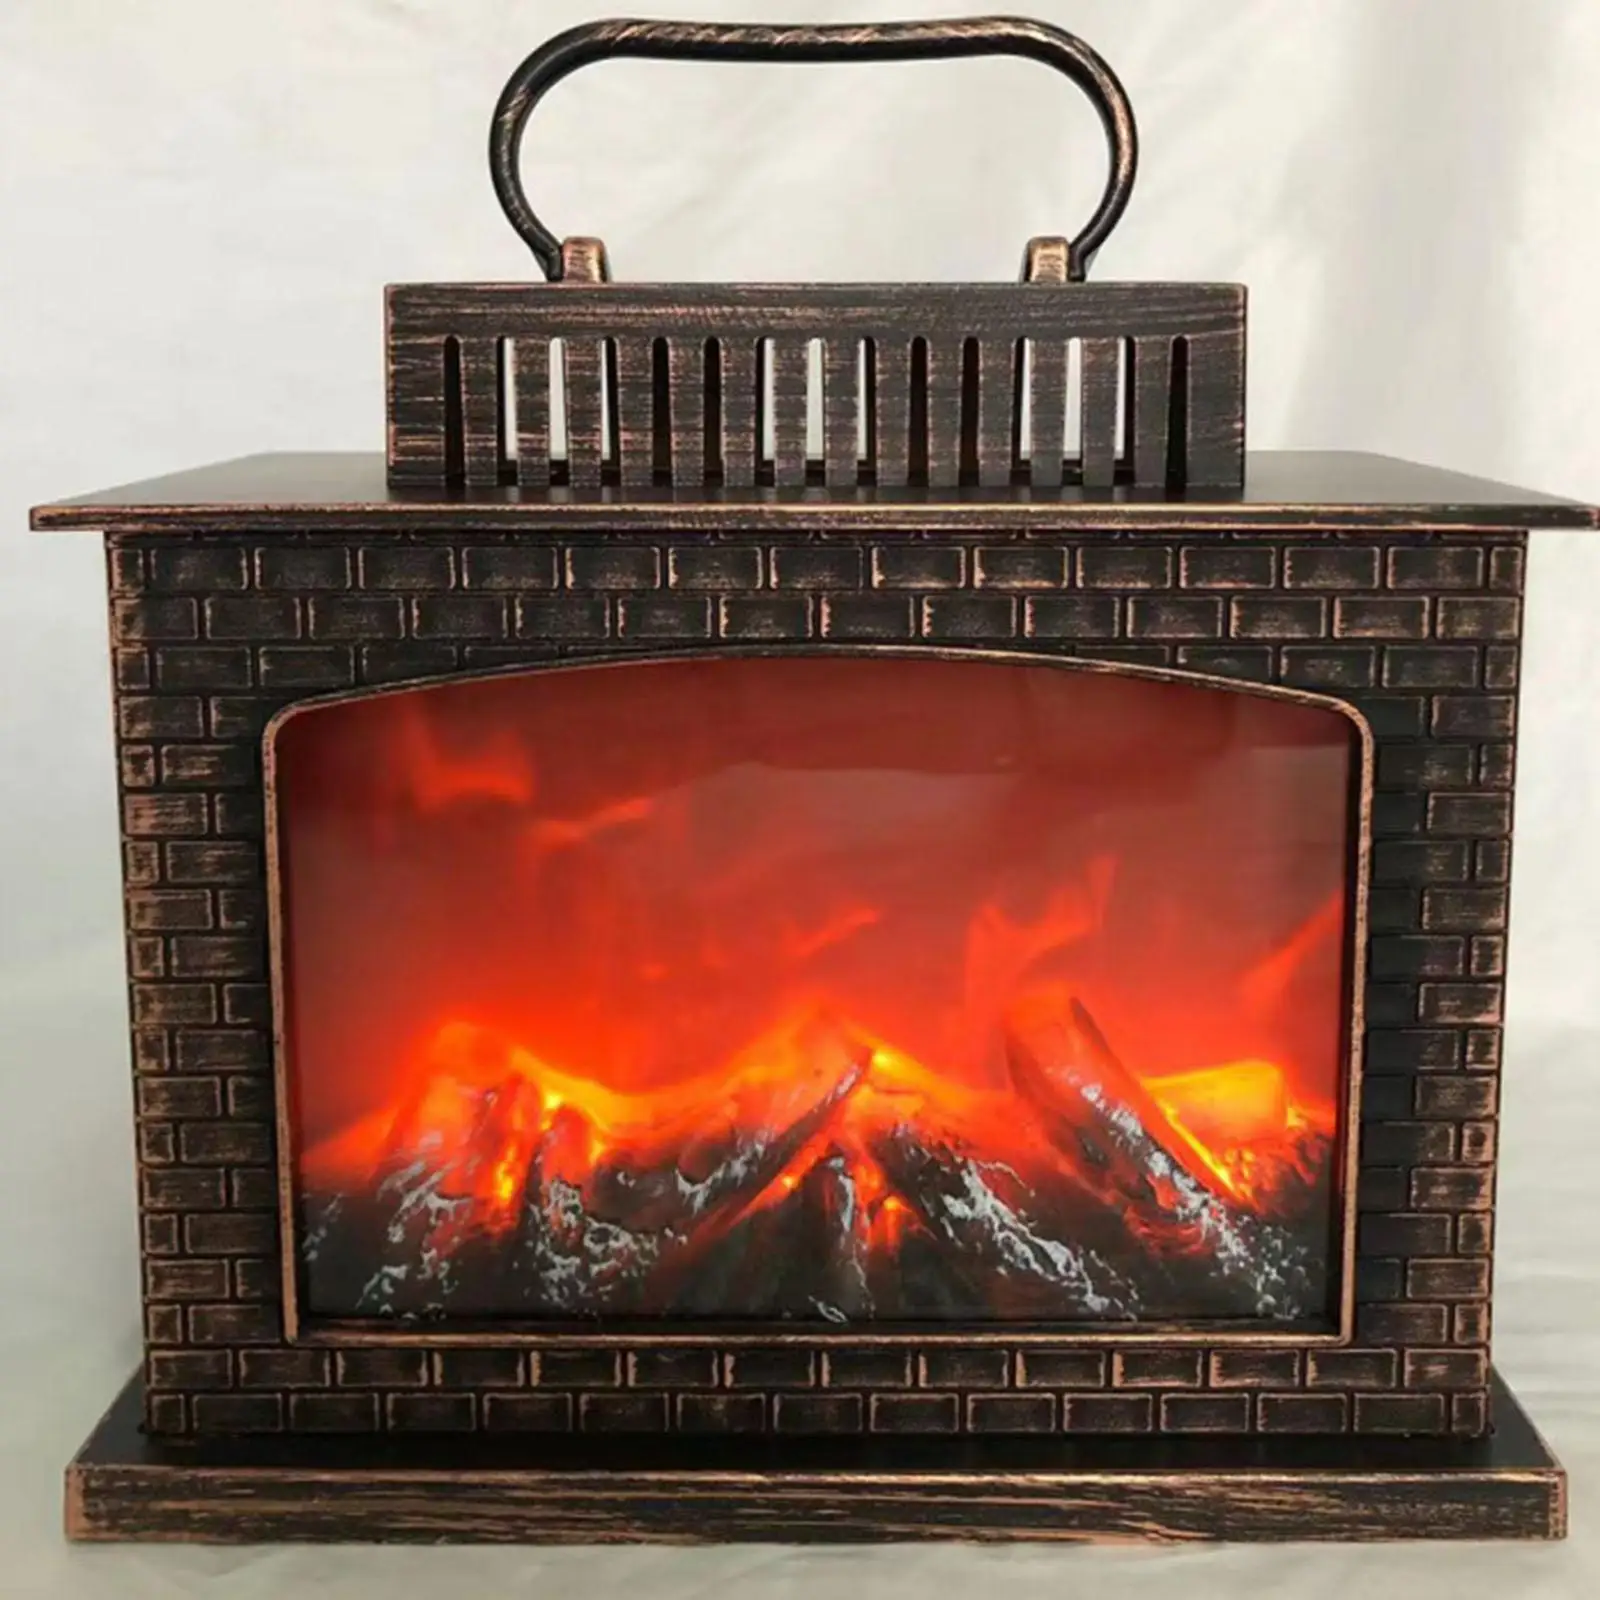 Simulation Fireplace Light Vintage Decorative Christmas Decoration USB Powered Realistic for Bedroom Home